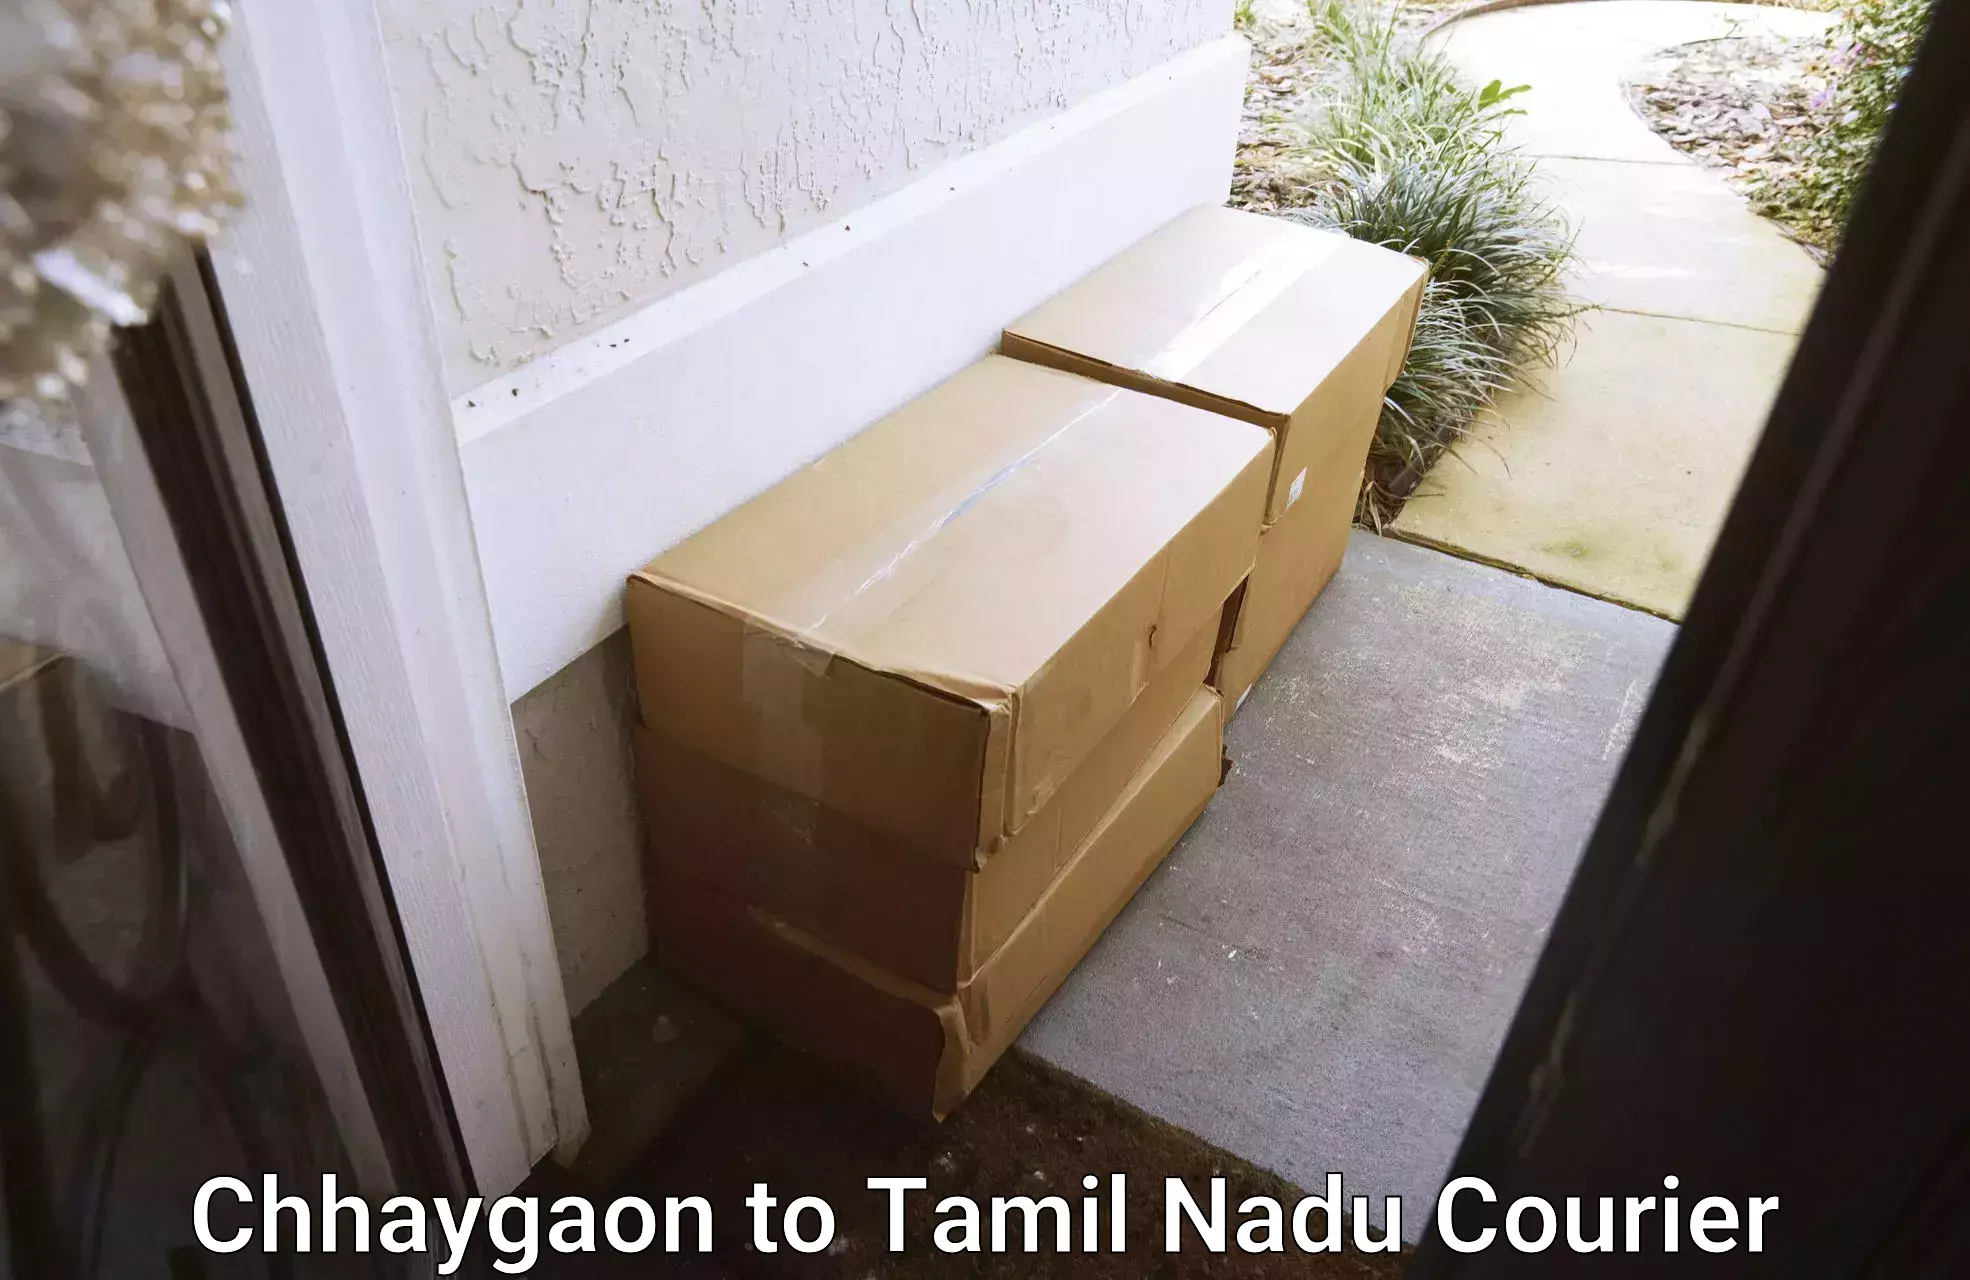 Personal parcel delivery in Chhaygaon to Krishnagiri